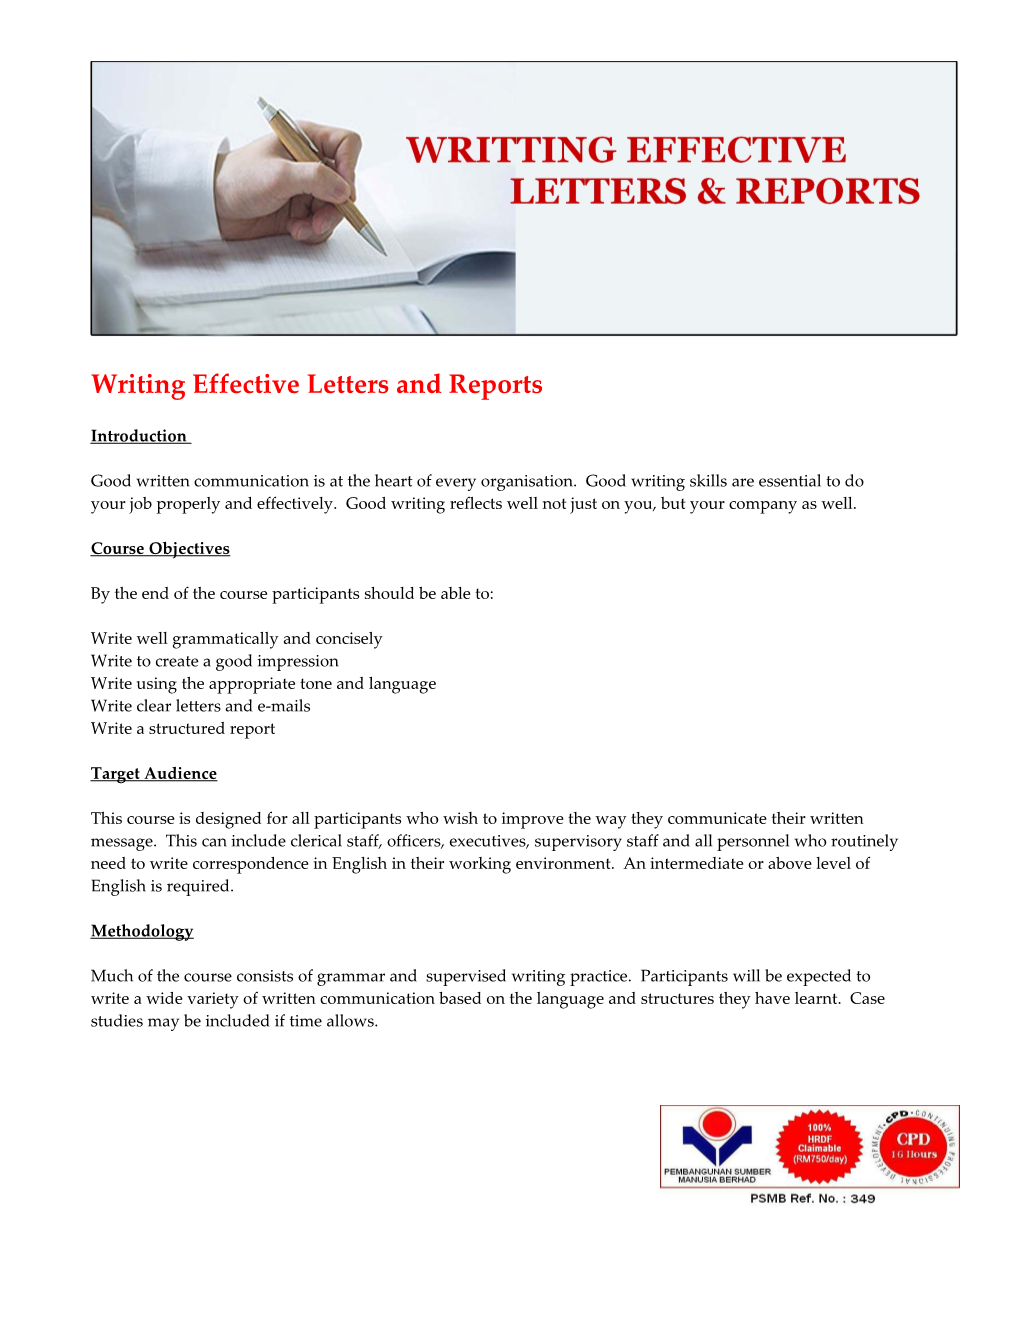 Writing Effective Letters and Reports